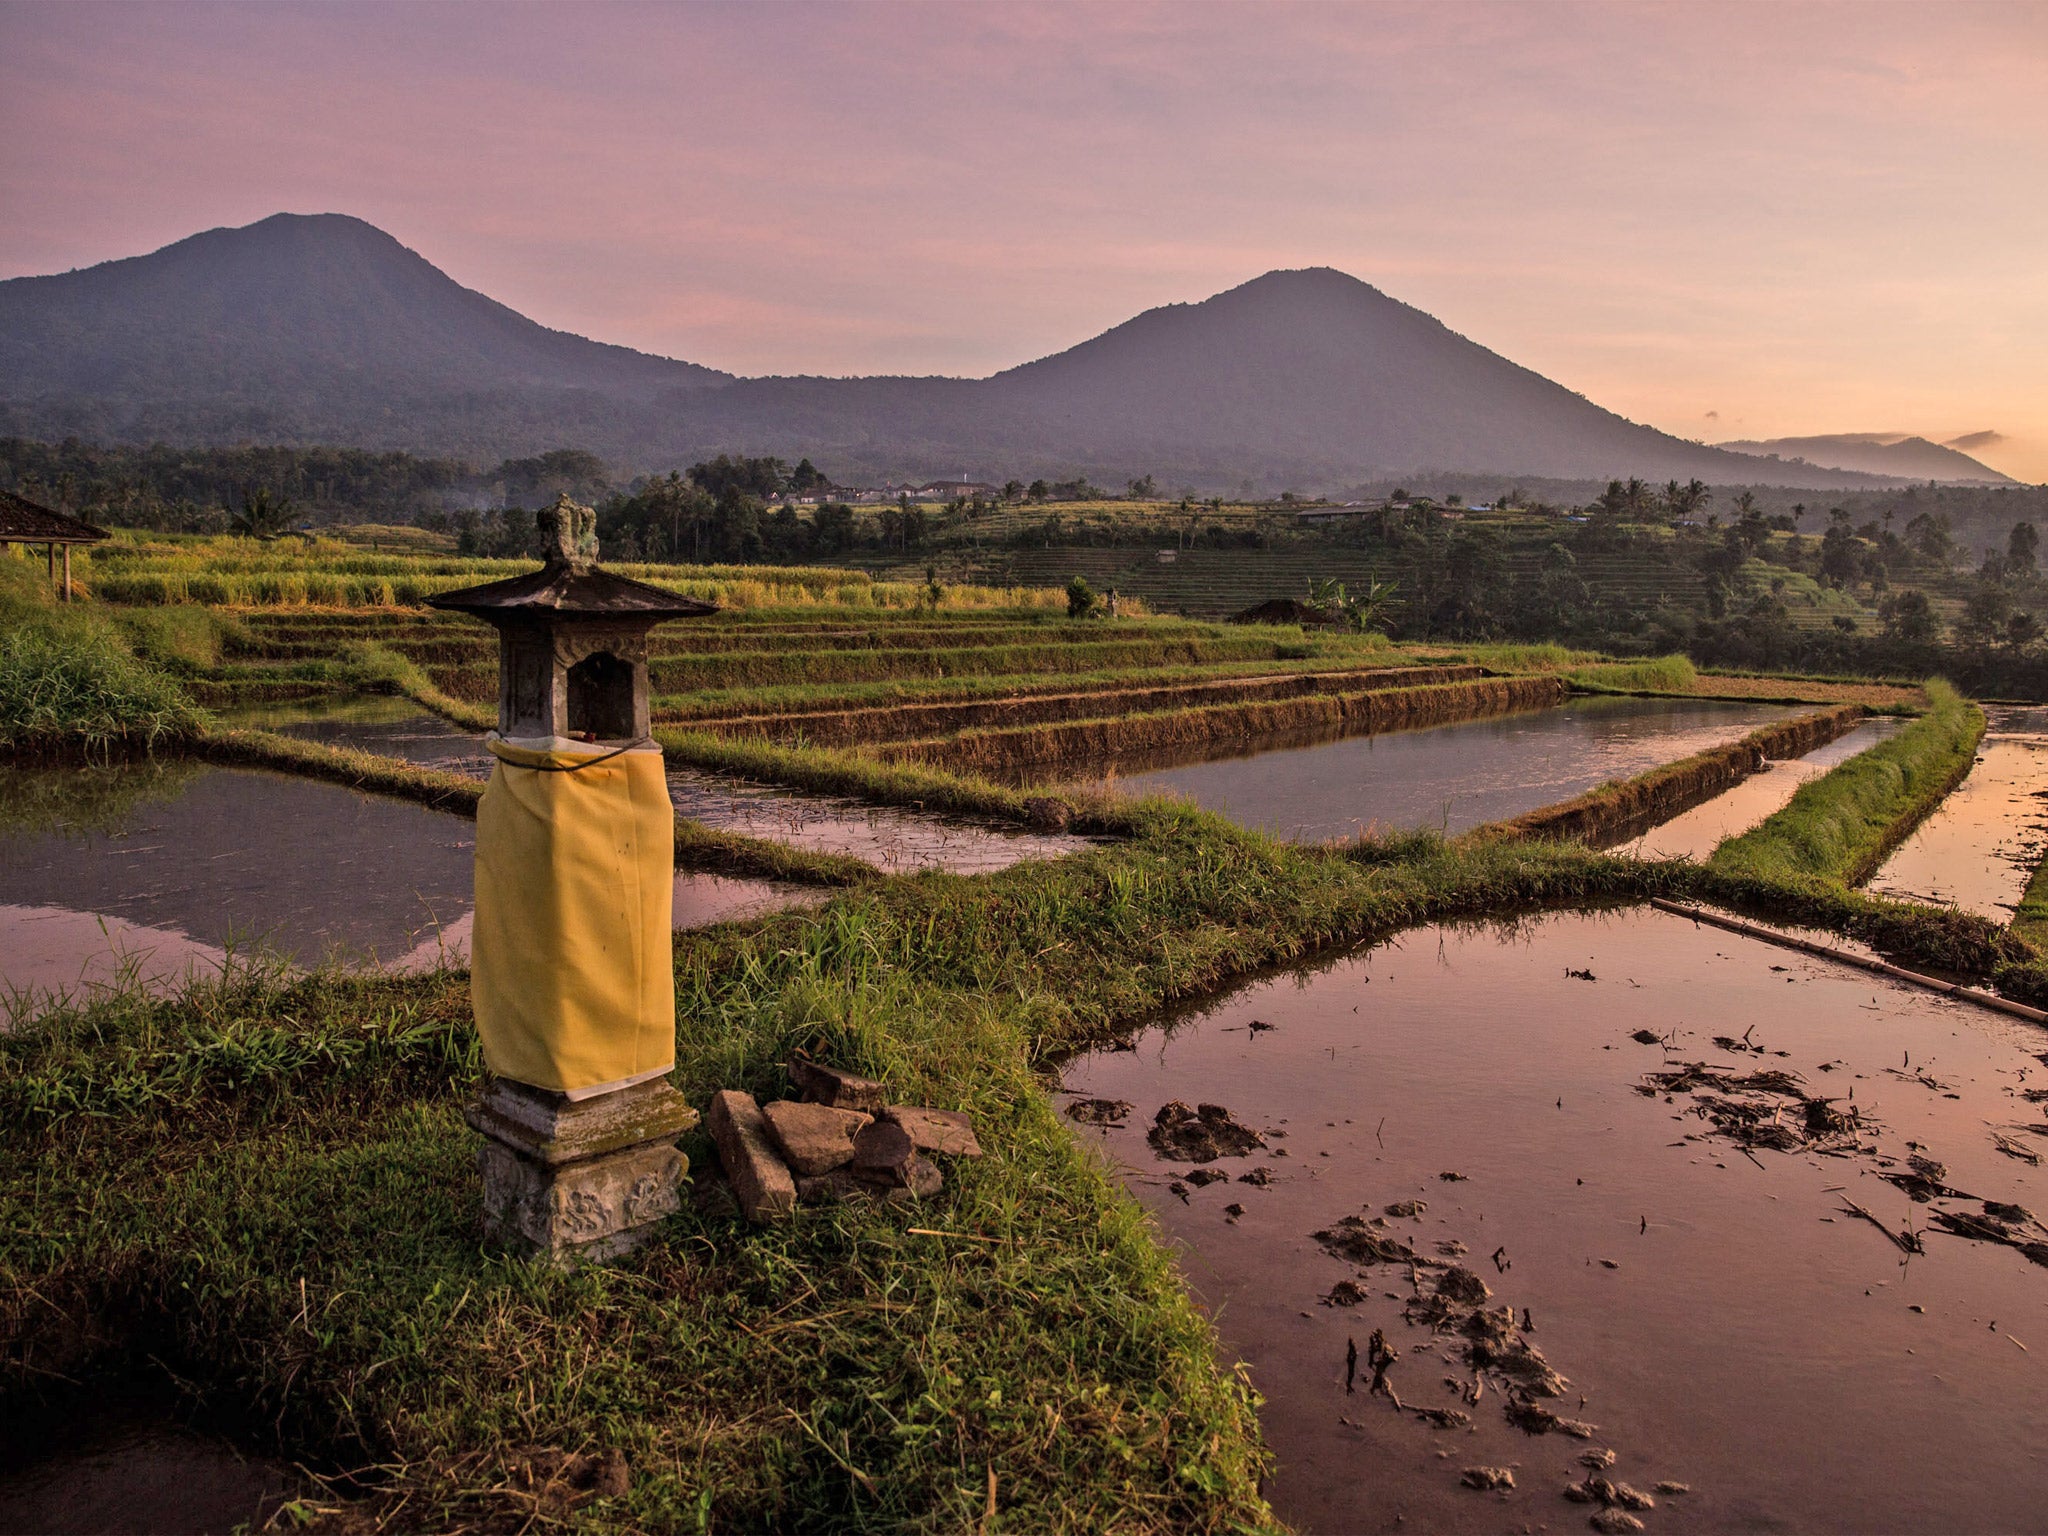 Rice fields in Tabanan, Bali, Indonesia. El Nino looms on the horizon which could lead into drought and lack of rainfall for the region